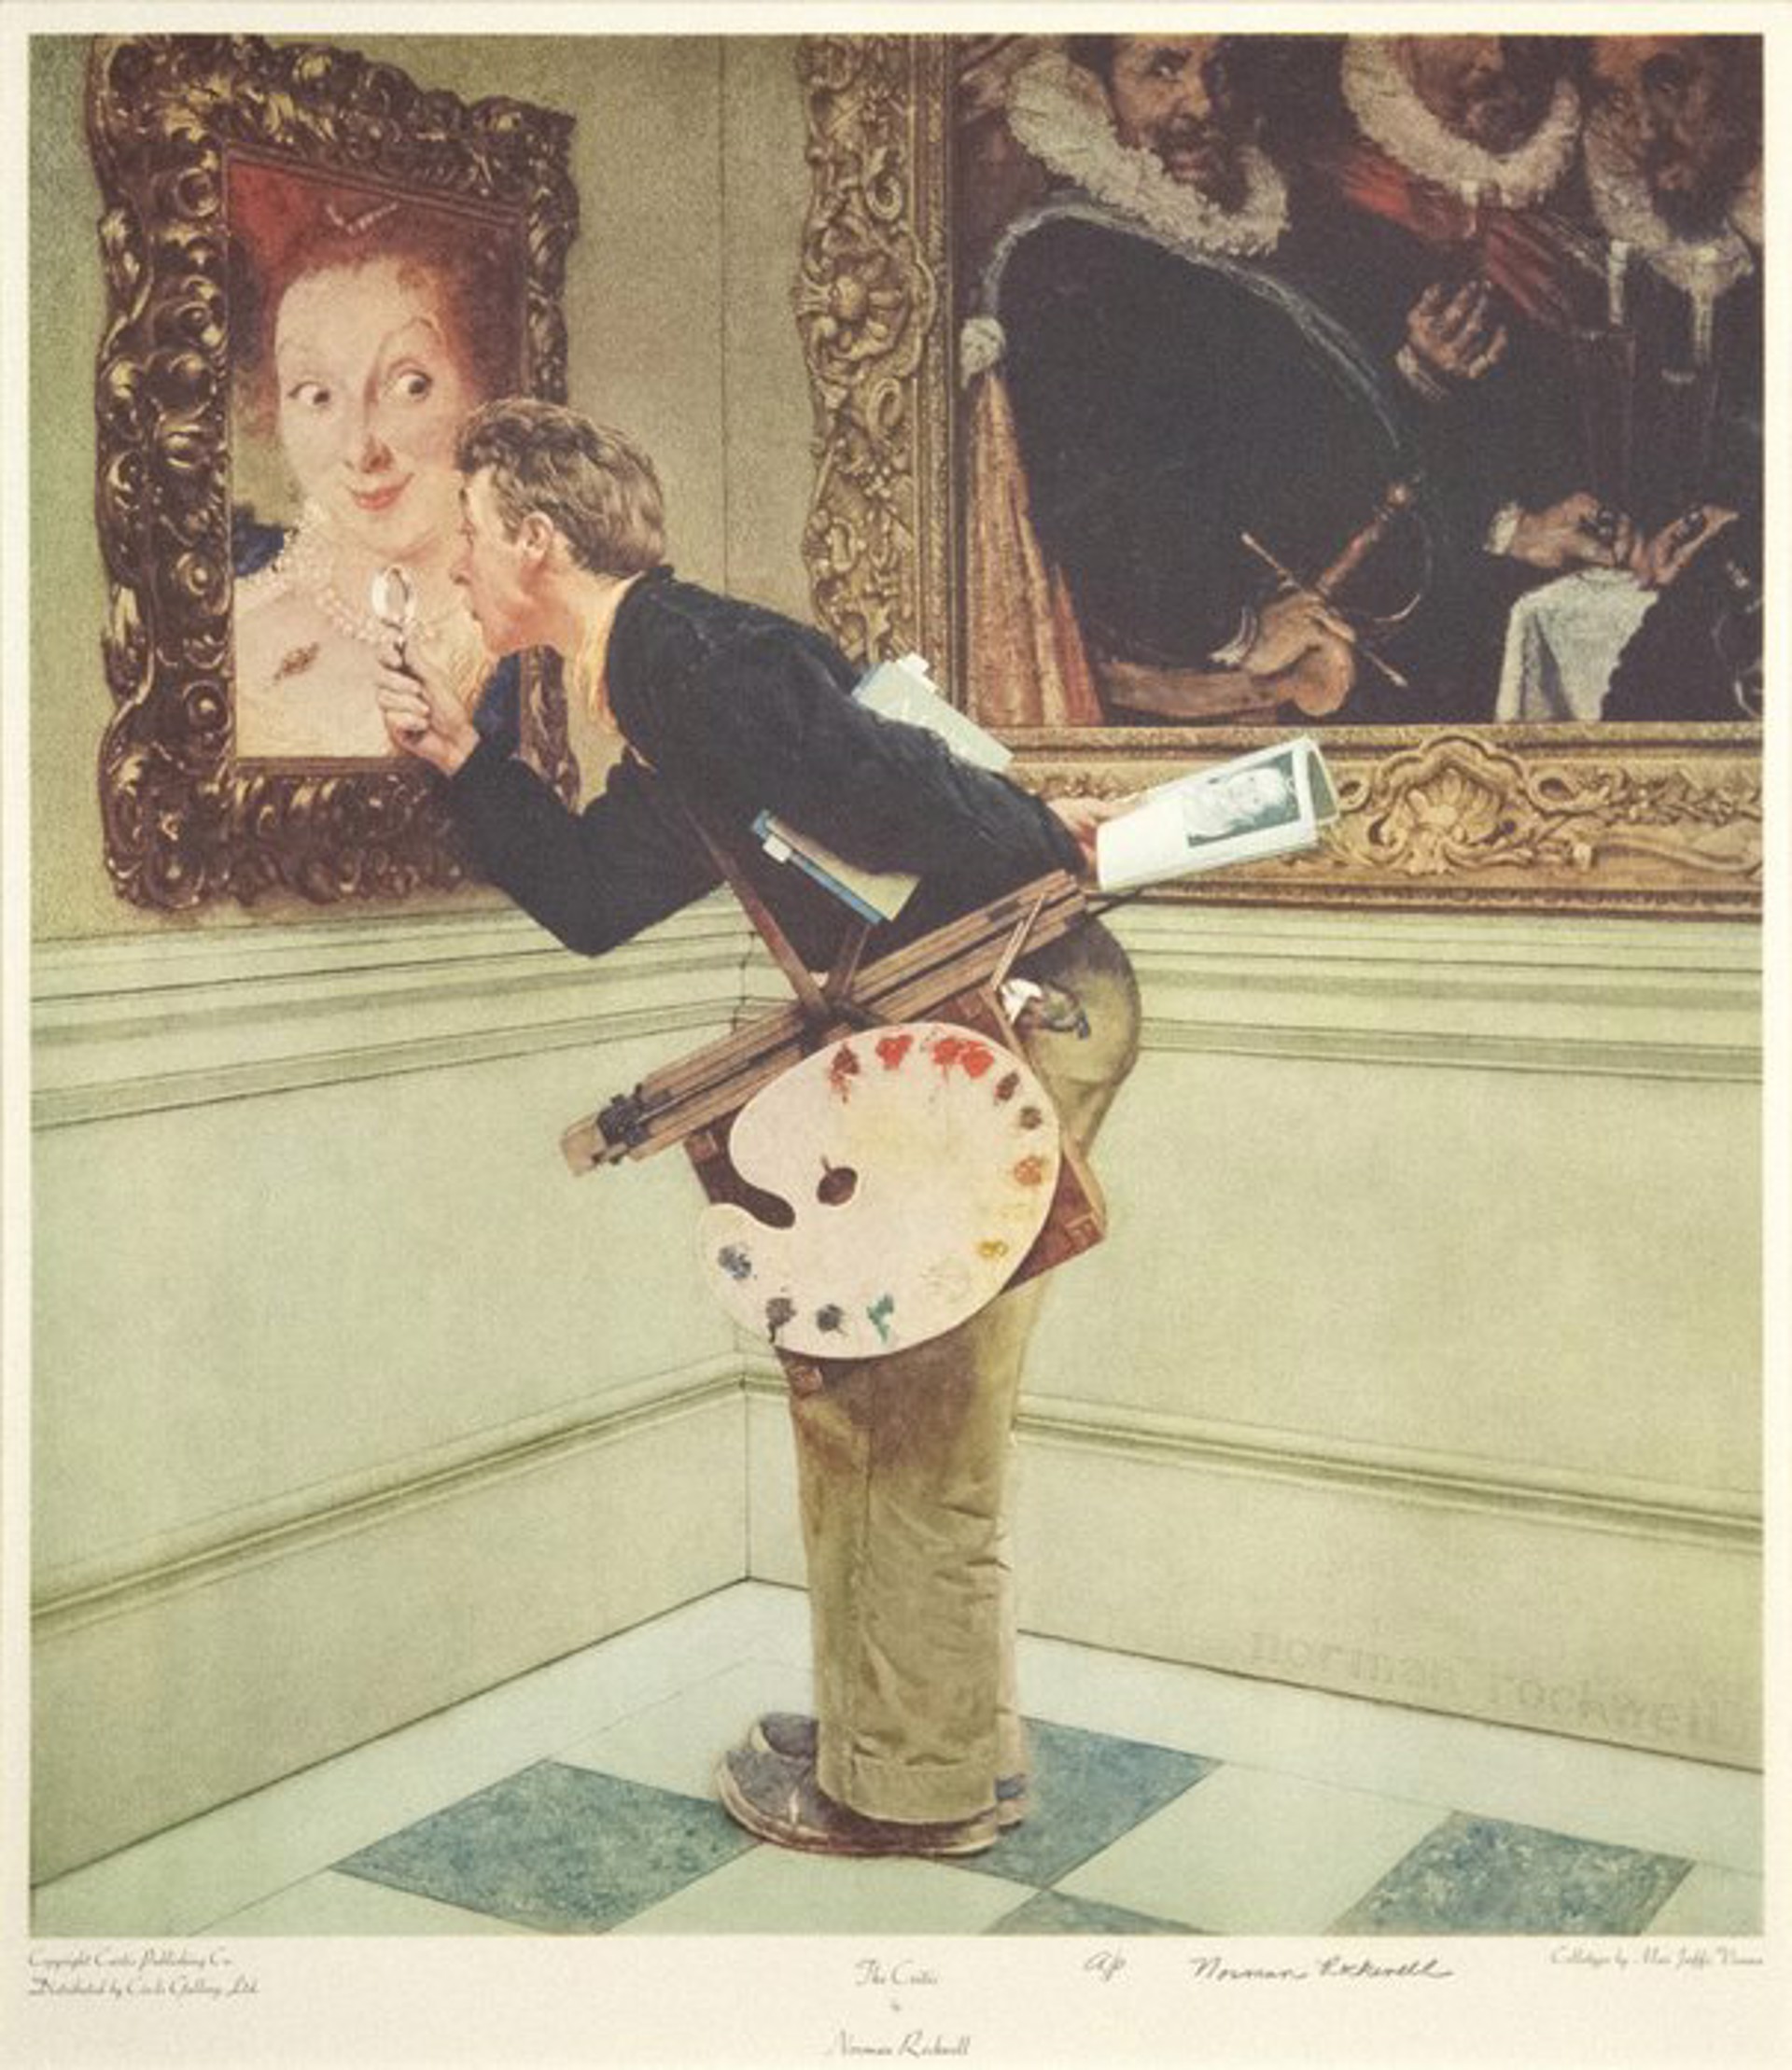 The Art Critic by Norman Rockwell